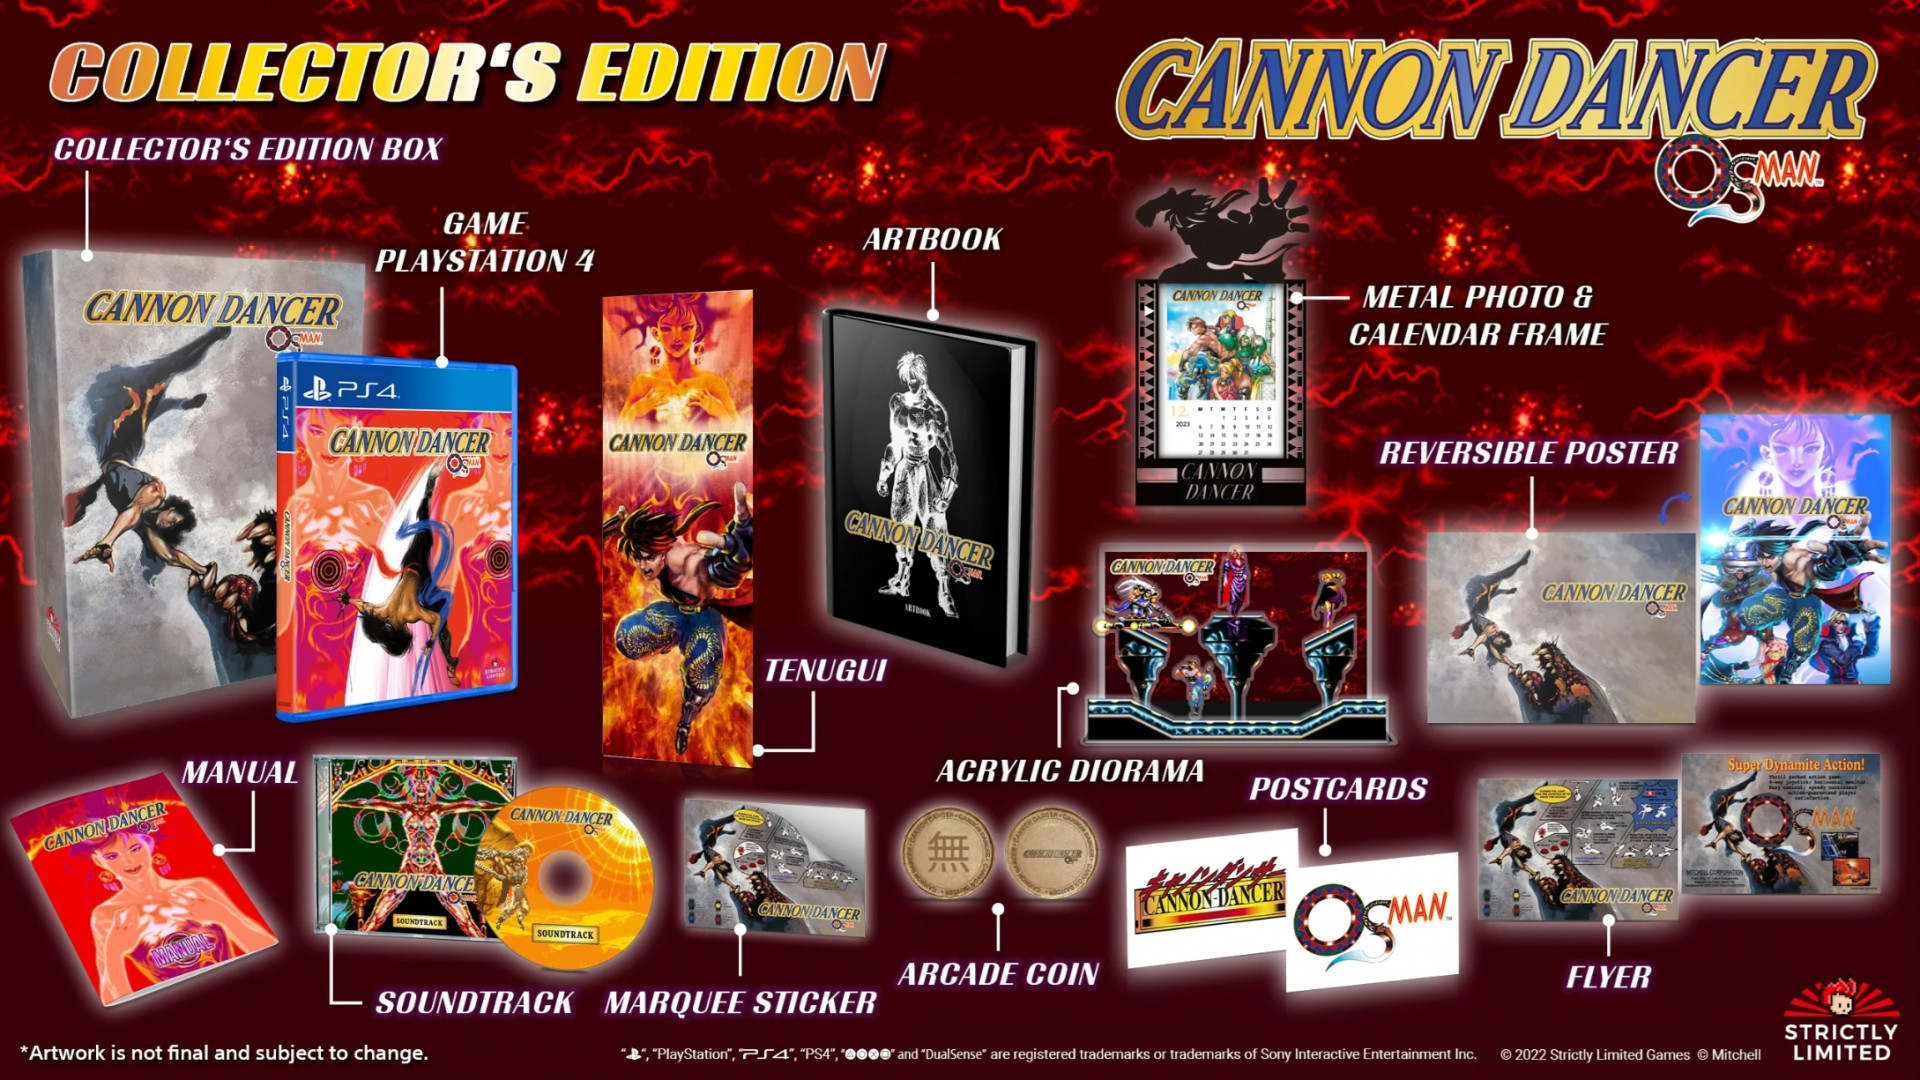 Cannon Dancer: Osman - Collector's Edition (Strictly Limited) (PS4), Atlus